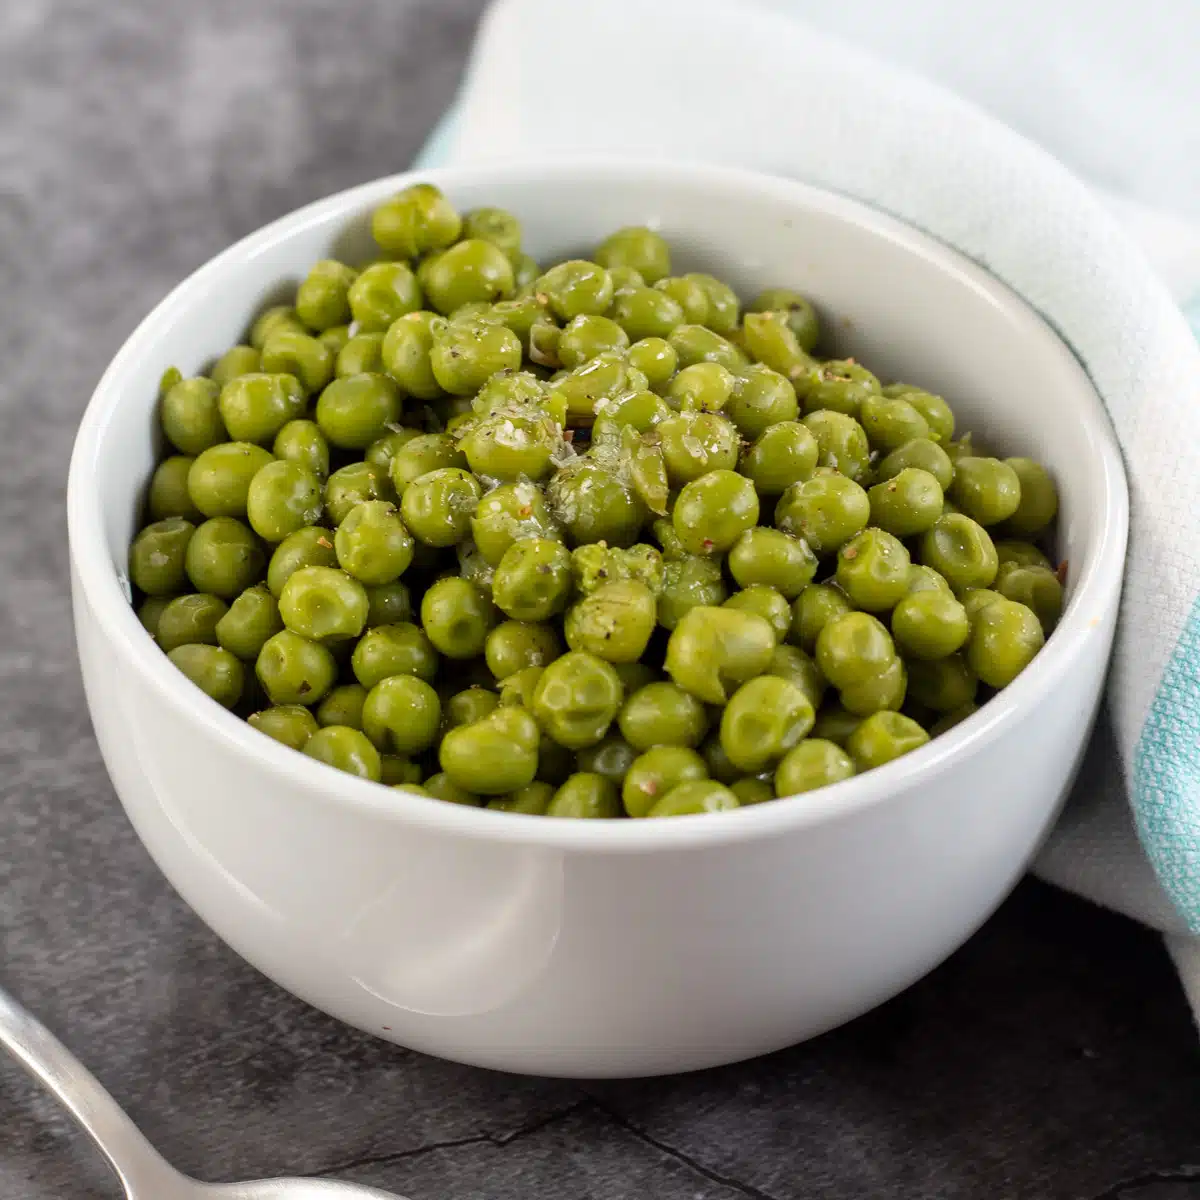 Square image showing canned cooked peas in a small white bowl.